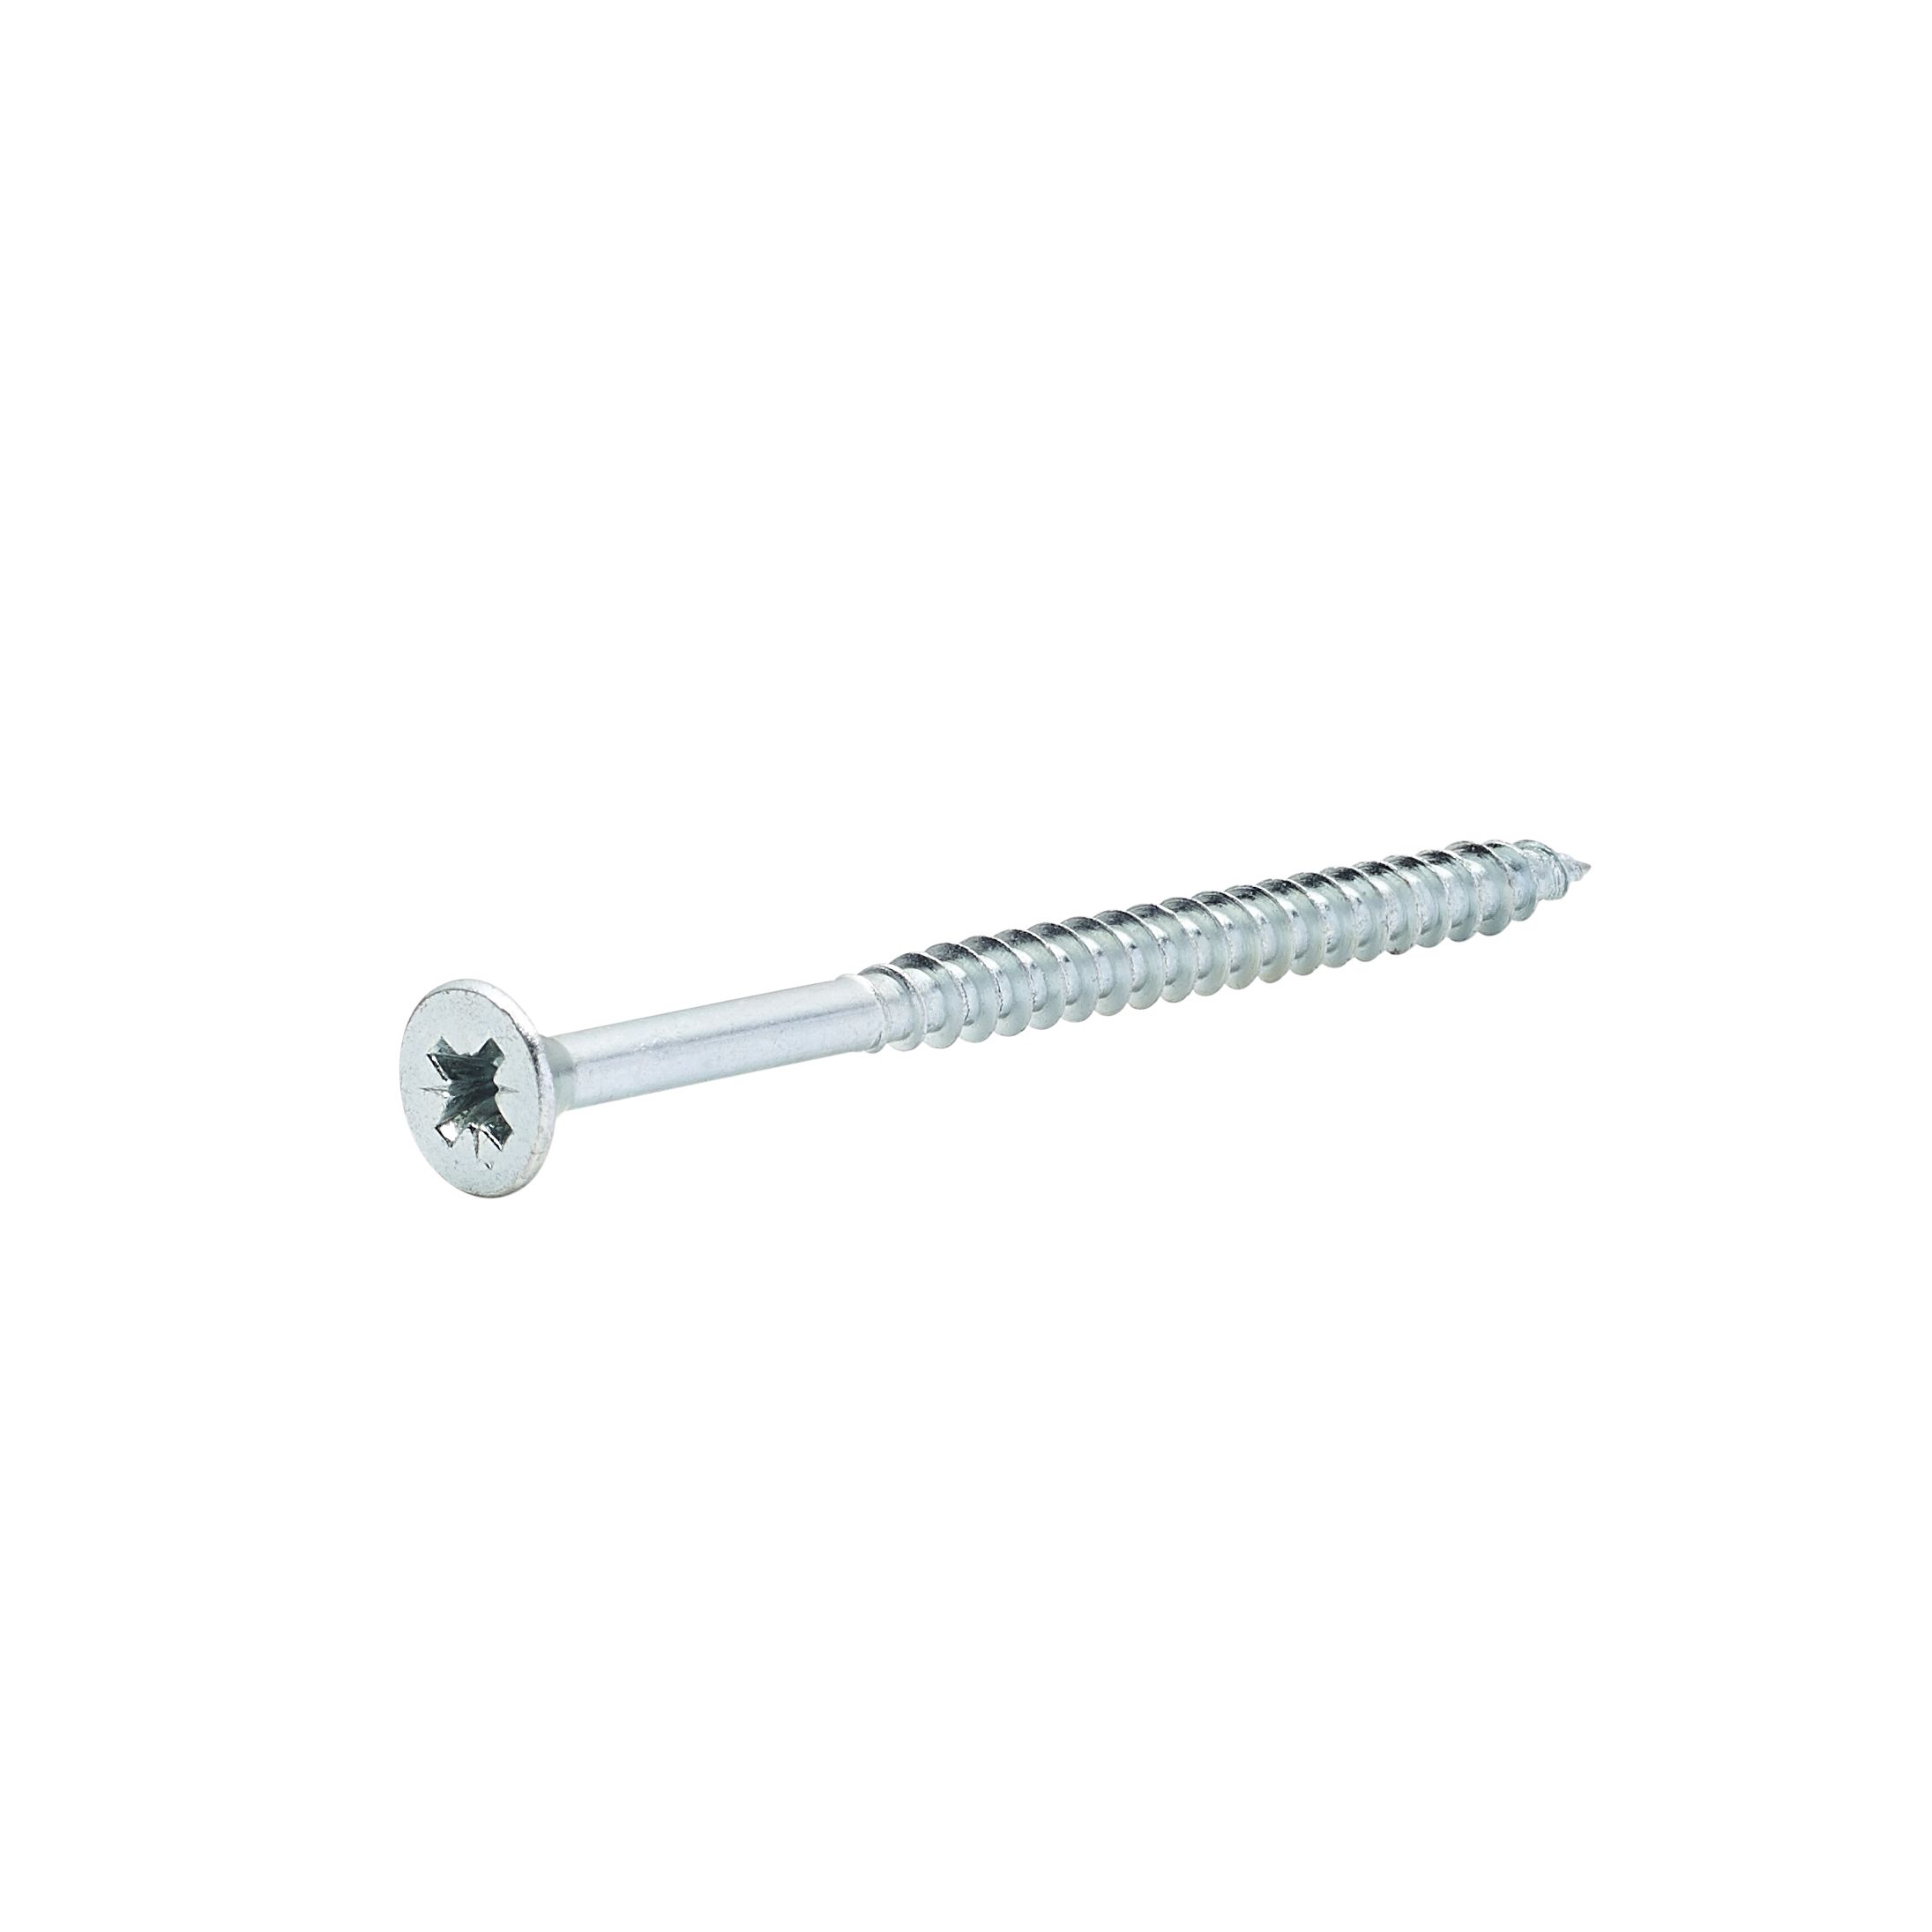 Diall Zinc-plated Carbon steel Screw (Dia)6mm (L)90mm, Pack of 20